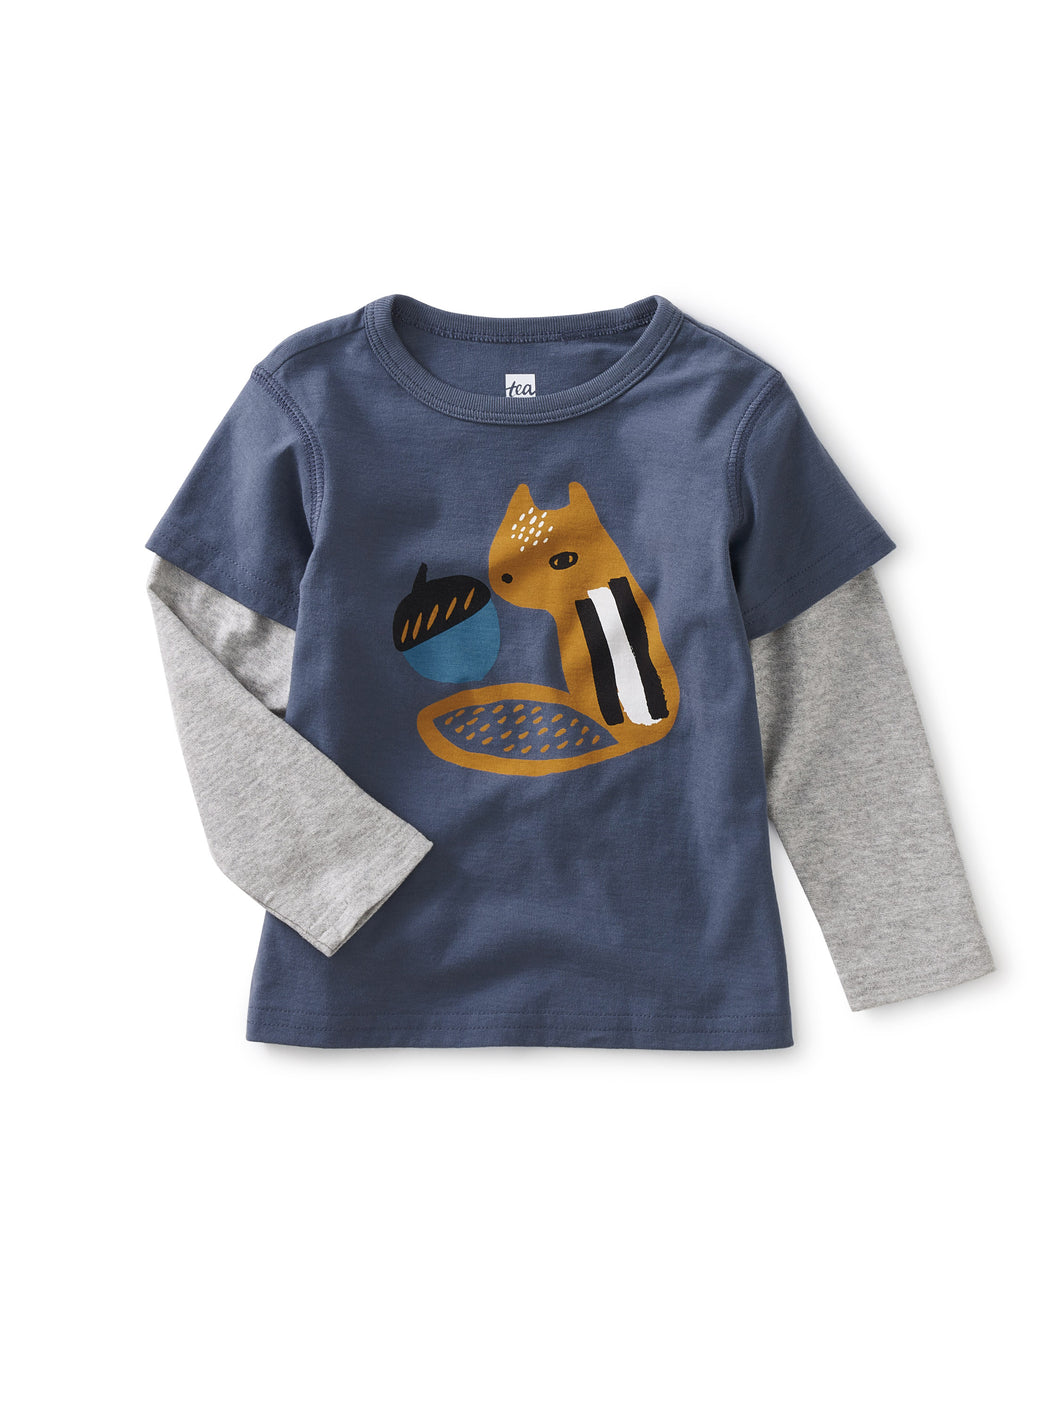 Aww Nuts Layered Baby Graphic Tee Triumph